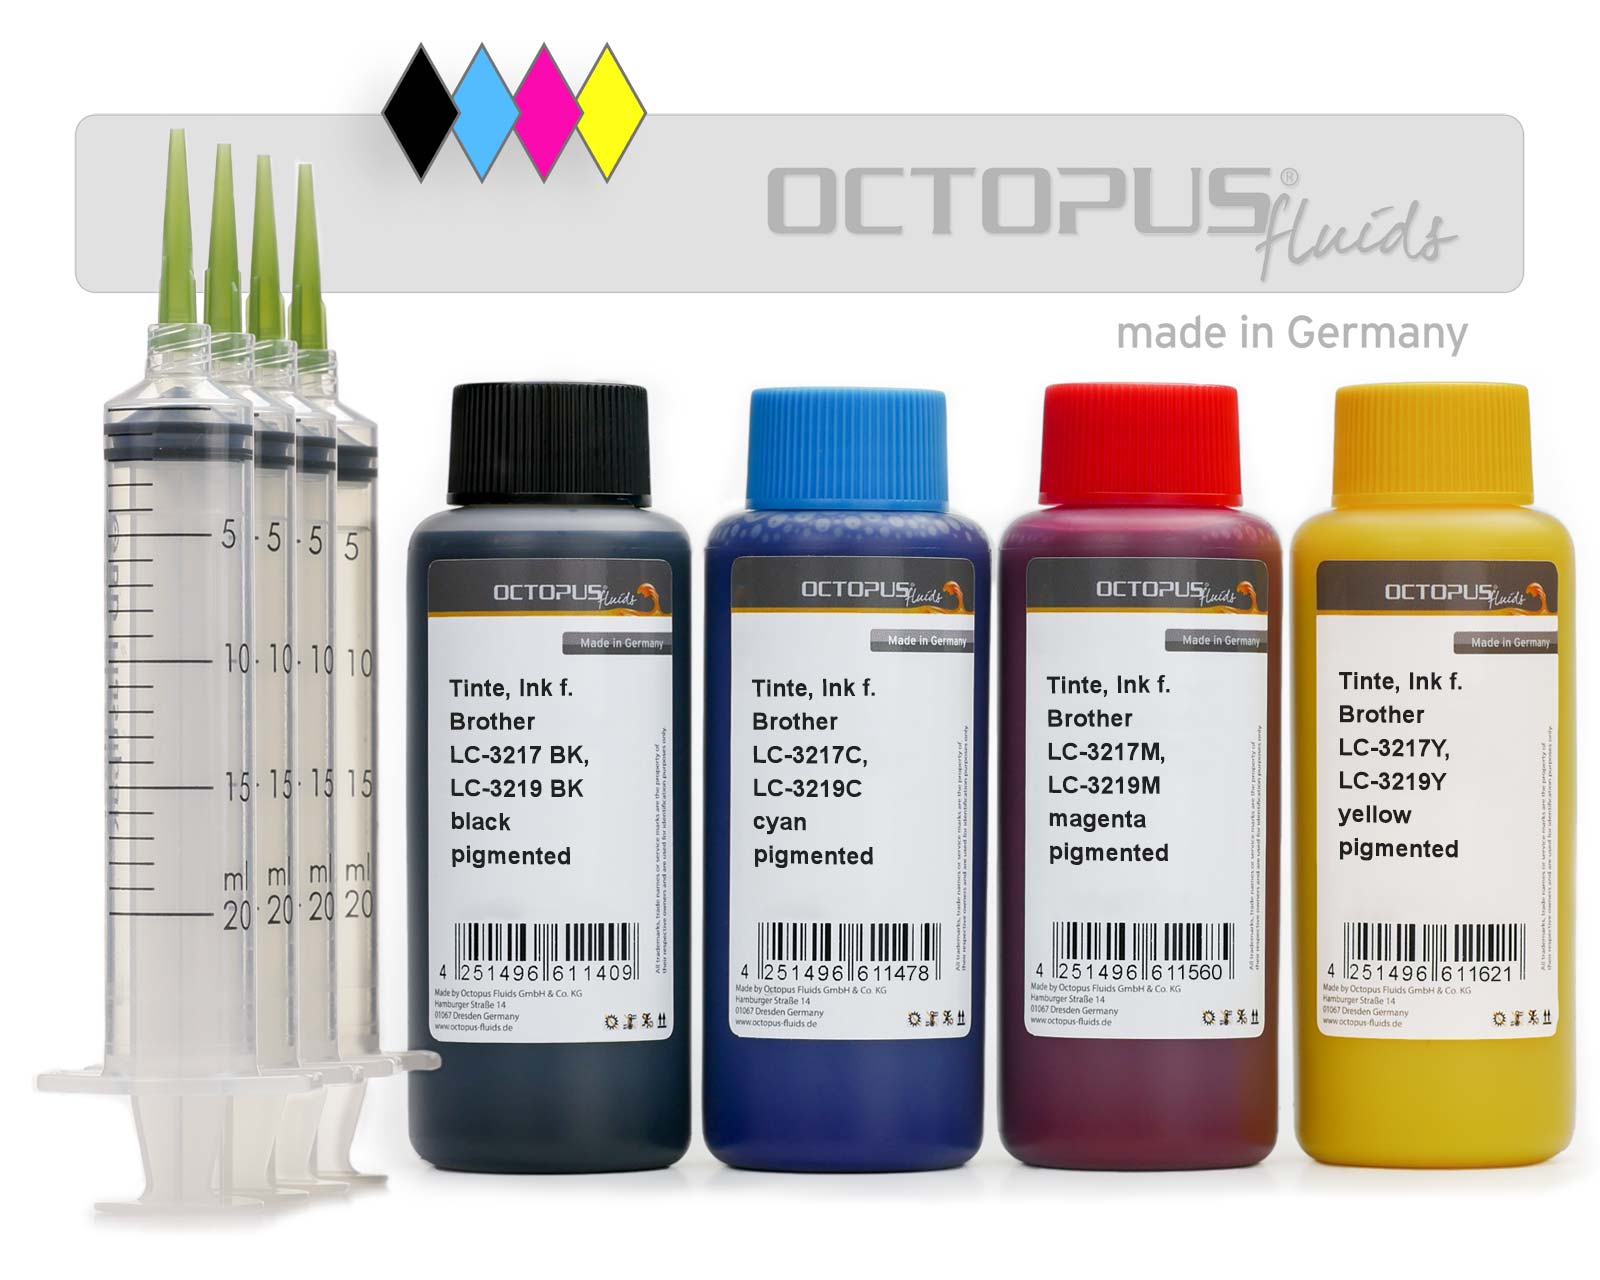 Refill ink comp. with Brother LC-3217, LC-3219 cartridges, CMYK pigmented